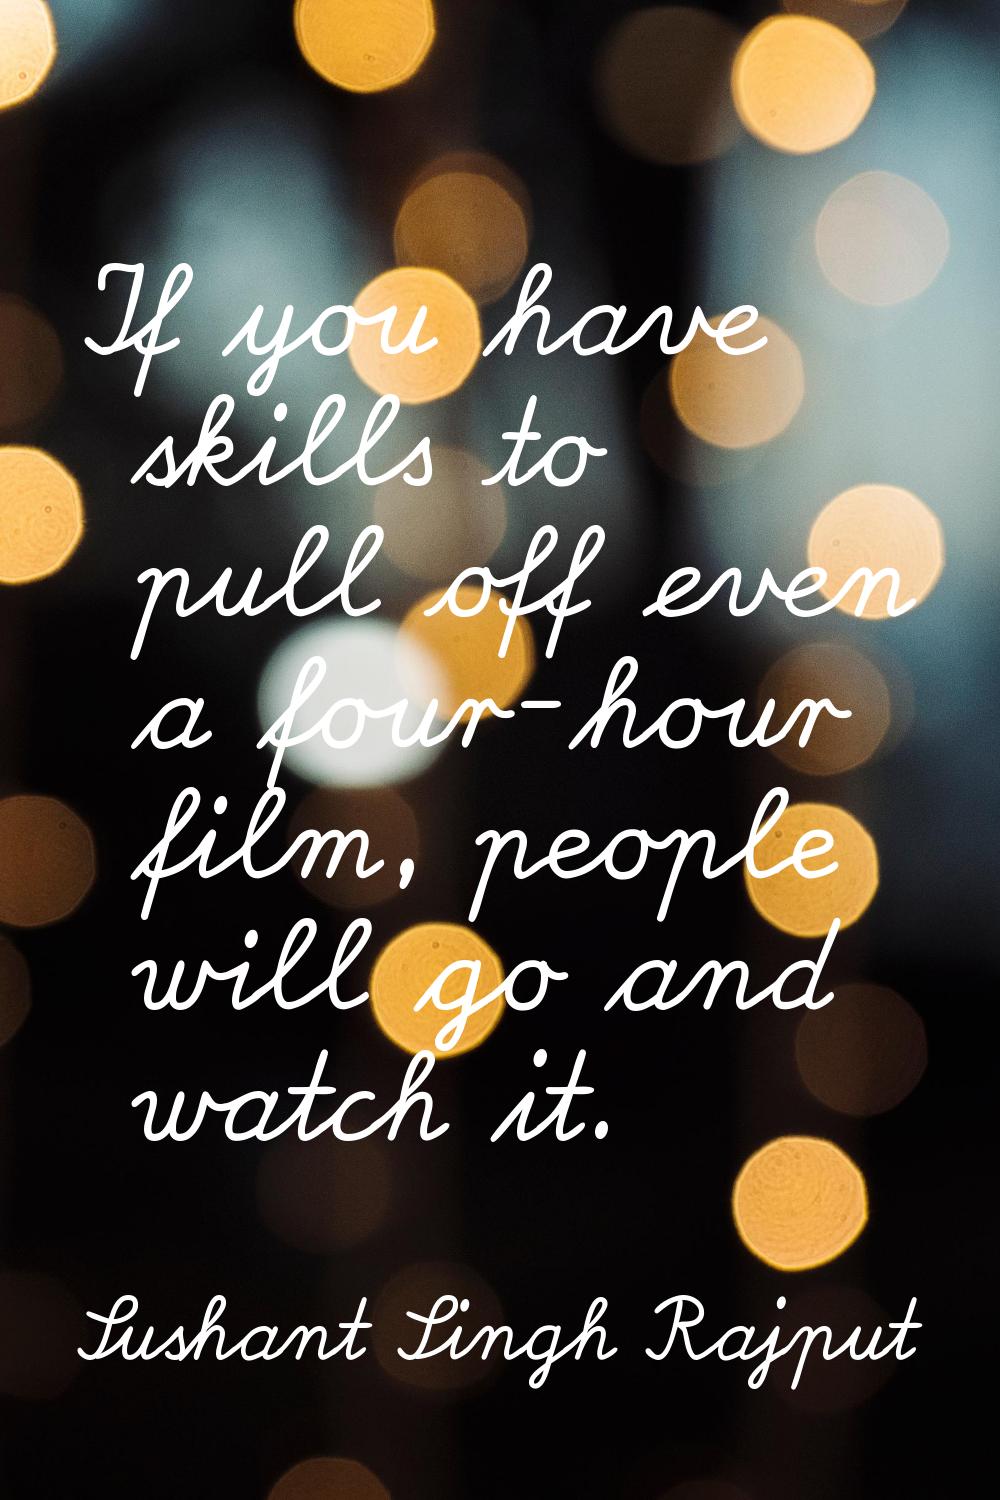 If you have skills to pull off even a four-hour film, people will go and watch it.